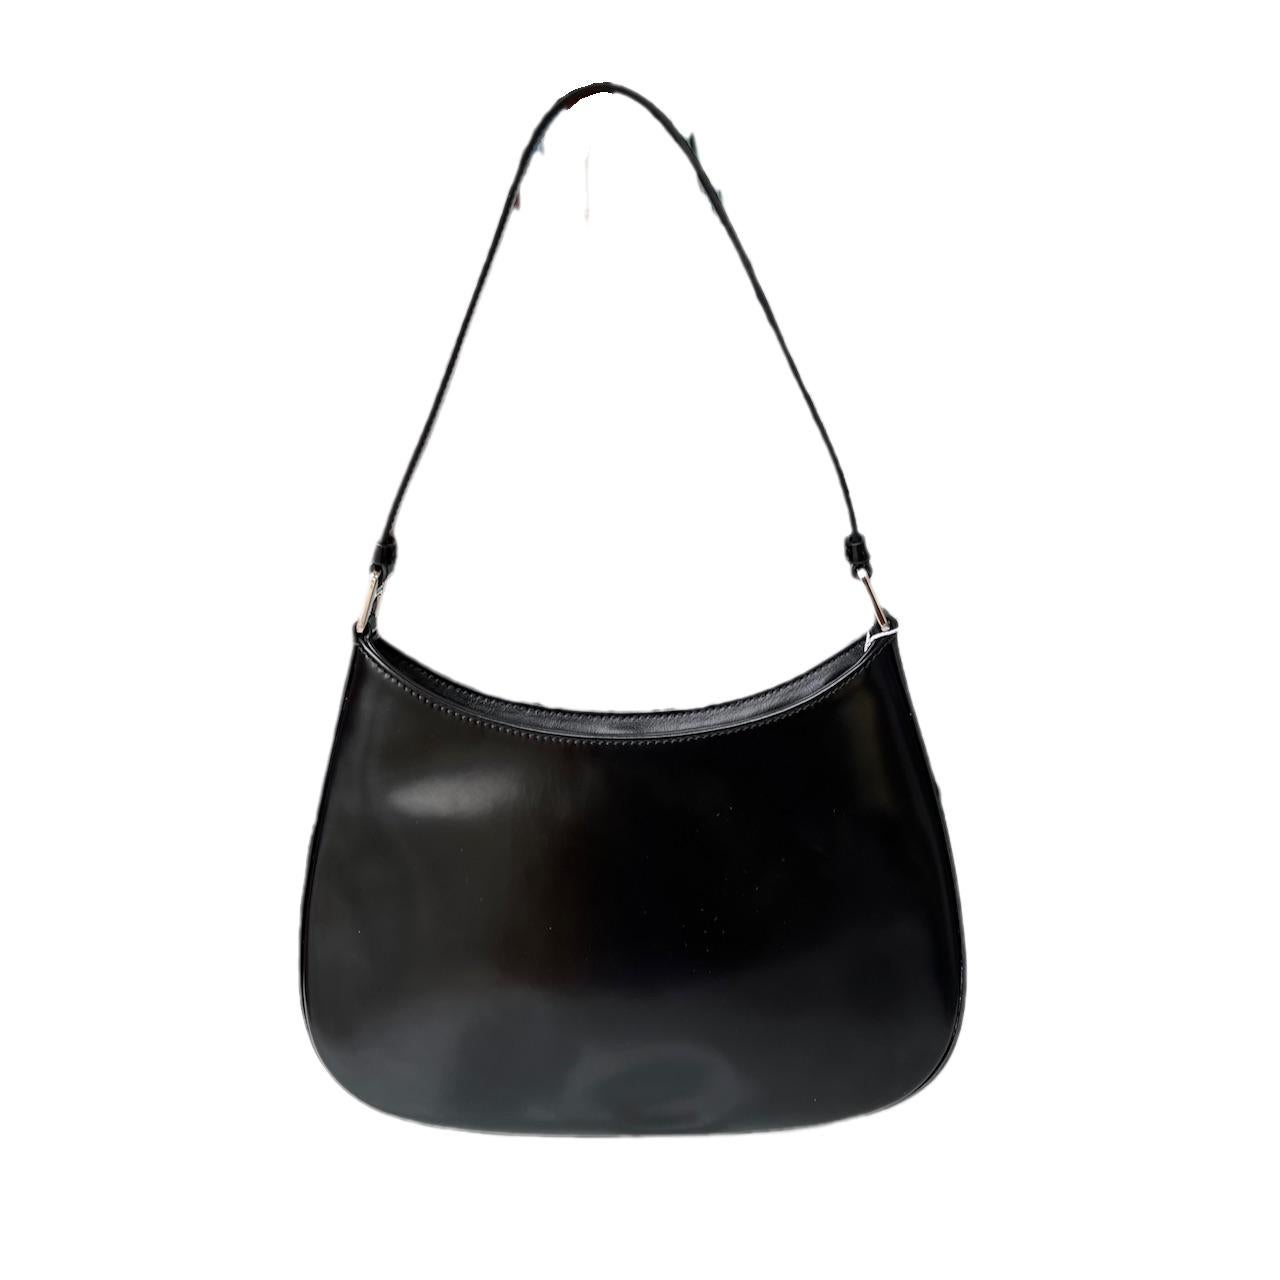 The Prada Cleo Black leather shoulder bag is a timeless classic. It is crafted from a smooth black leather with a mirror glaze shine. Combining luxury with simplicity, the Prada Cleo is the epitome of class and sophistication.

Minor indents on the